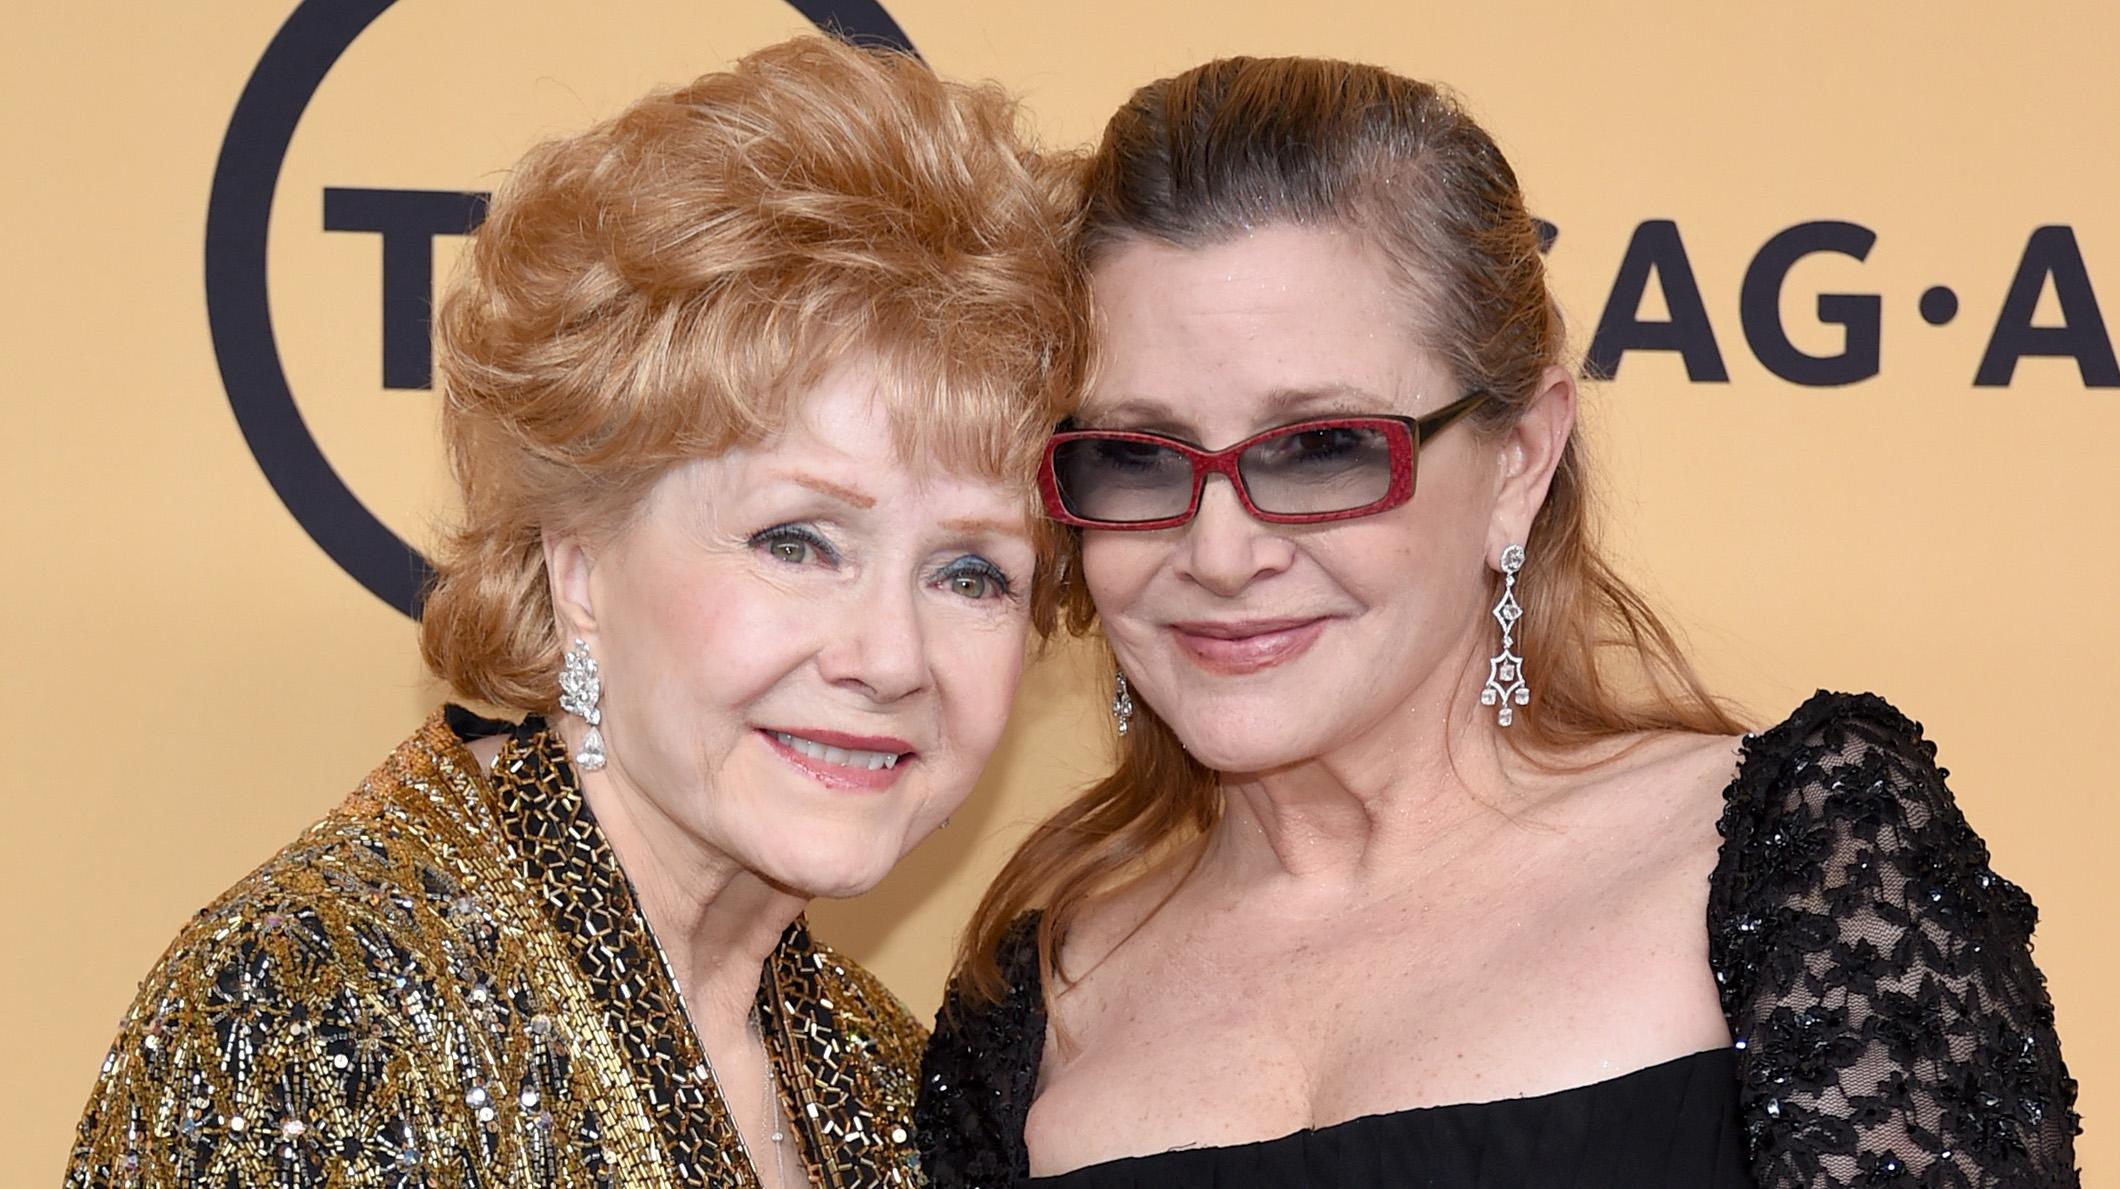 Actresses Debbie Reynolds (L), recipient of the Screen Actors Guild Life Achievement Award, and Carrie Fisher pose in the press room on January 25, 2015 in Los Angeles, California.